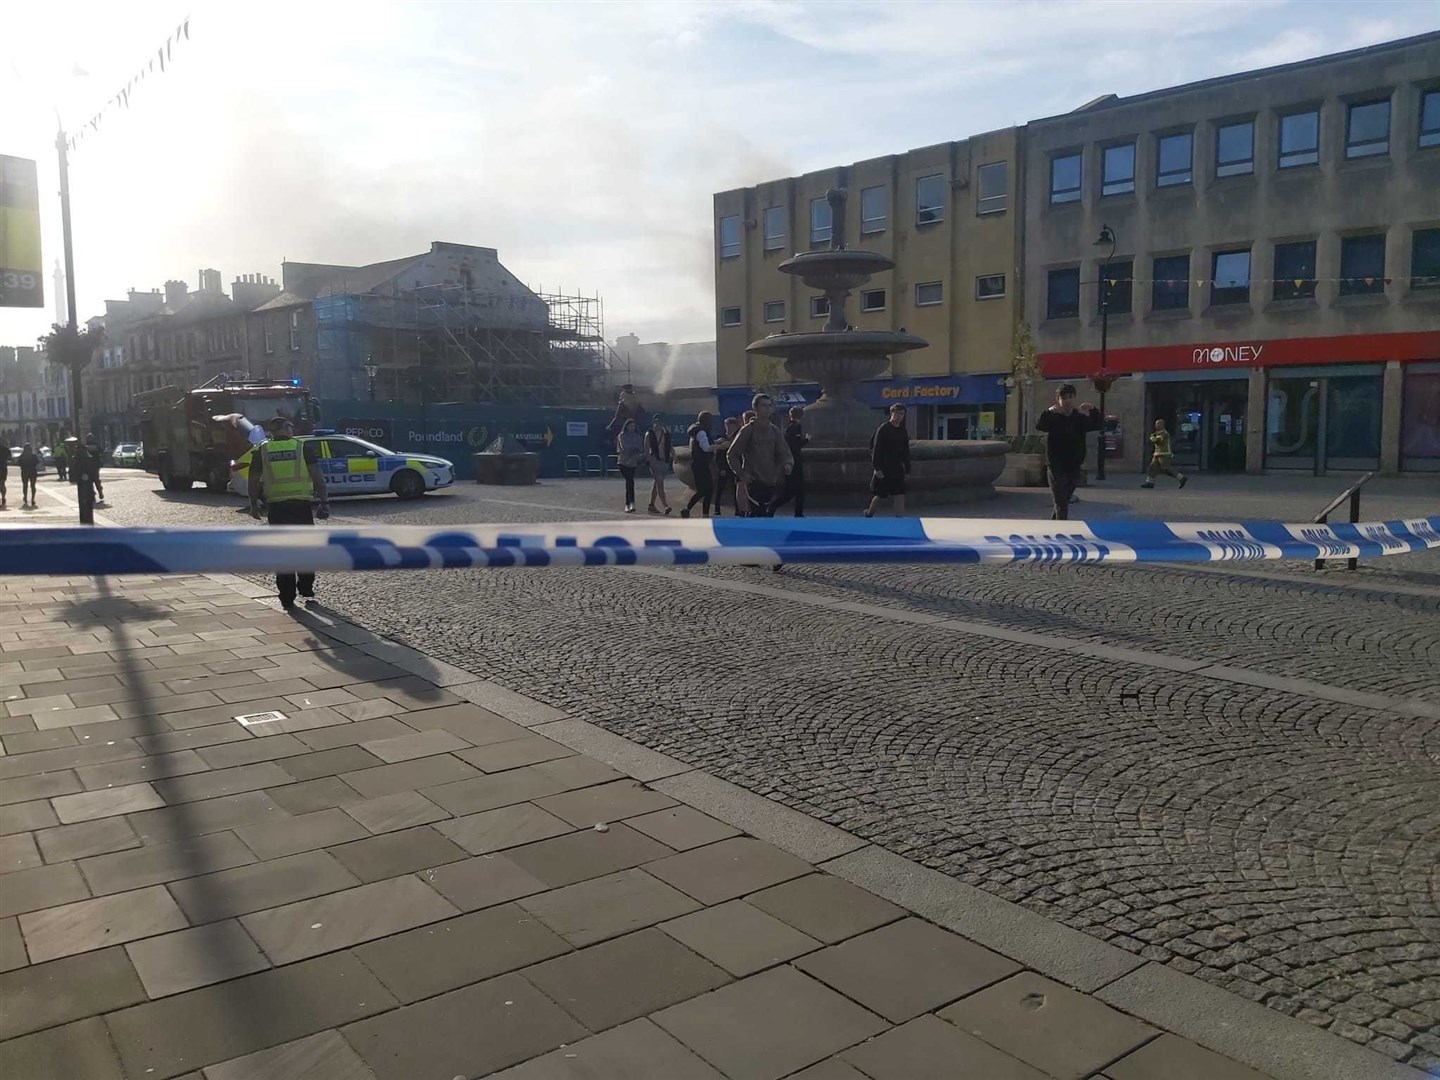 A cordon is now in place on Elgin High Street.